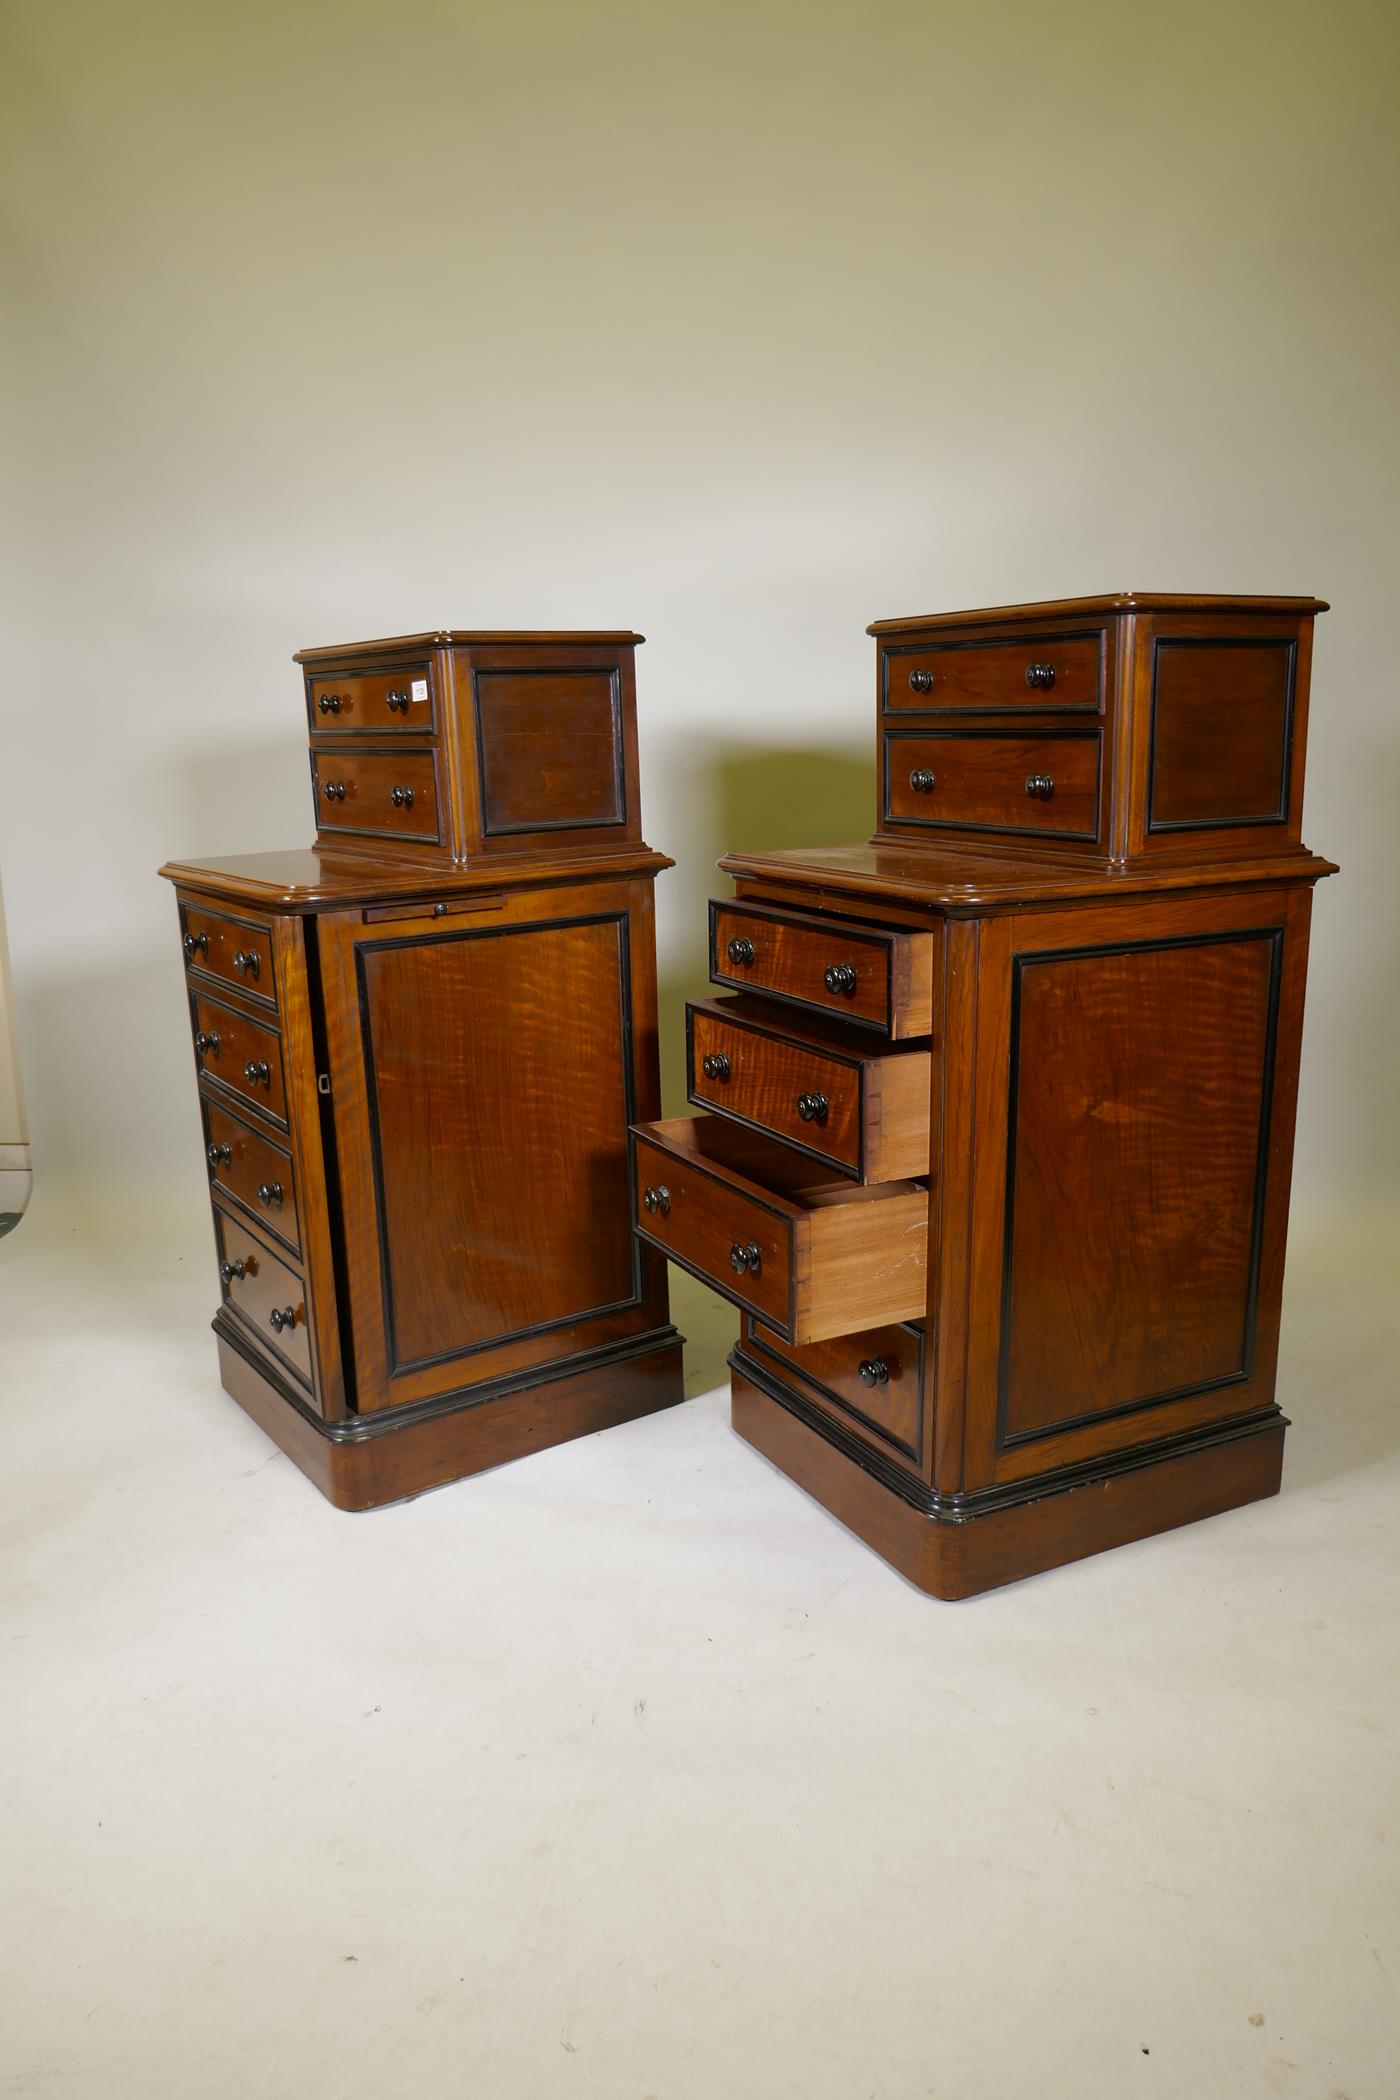 A pair of C19th walnut cabinets with ebony mouldings, one with six drawers, the other two drawers - Image 6 of 8